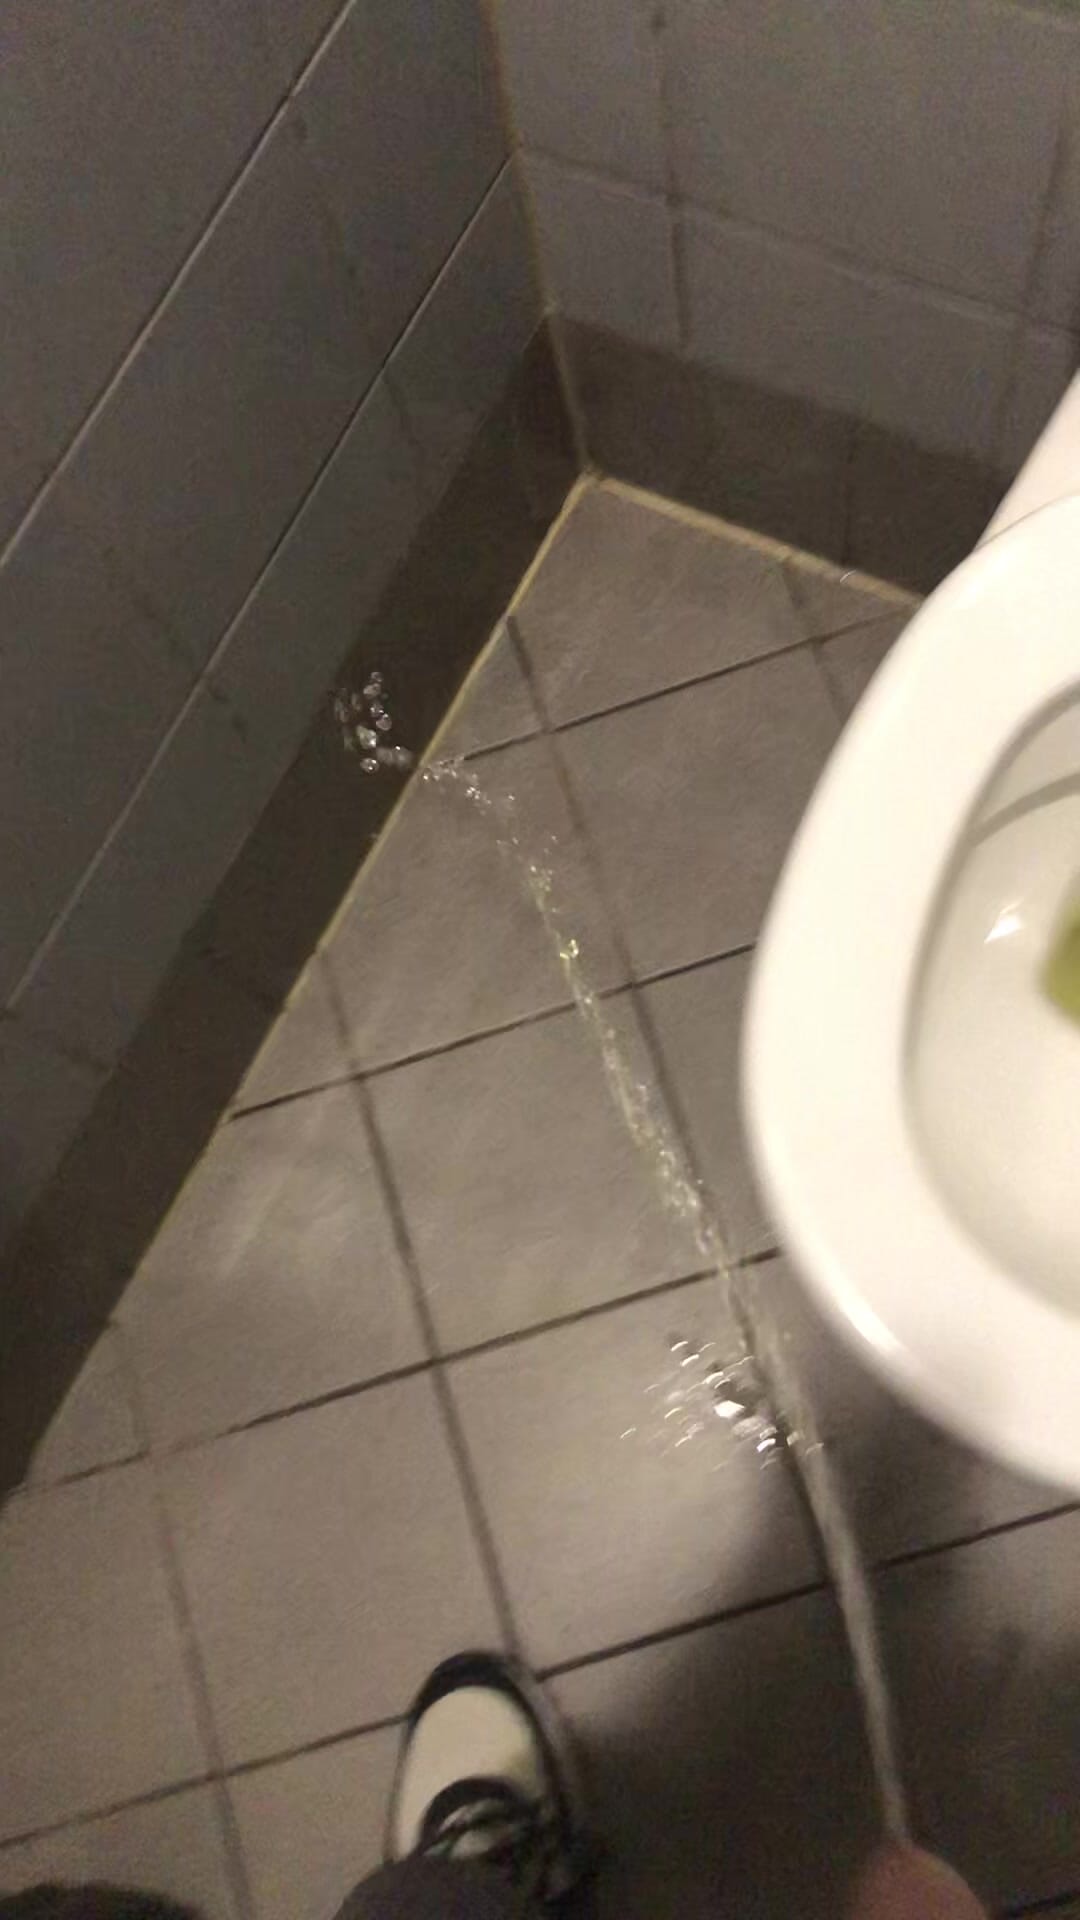 Pissing all over a toilet in a cafe